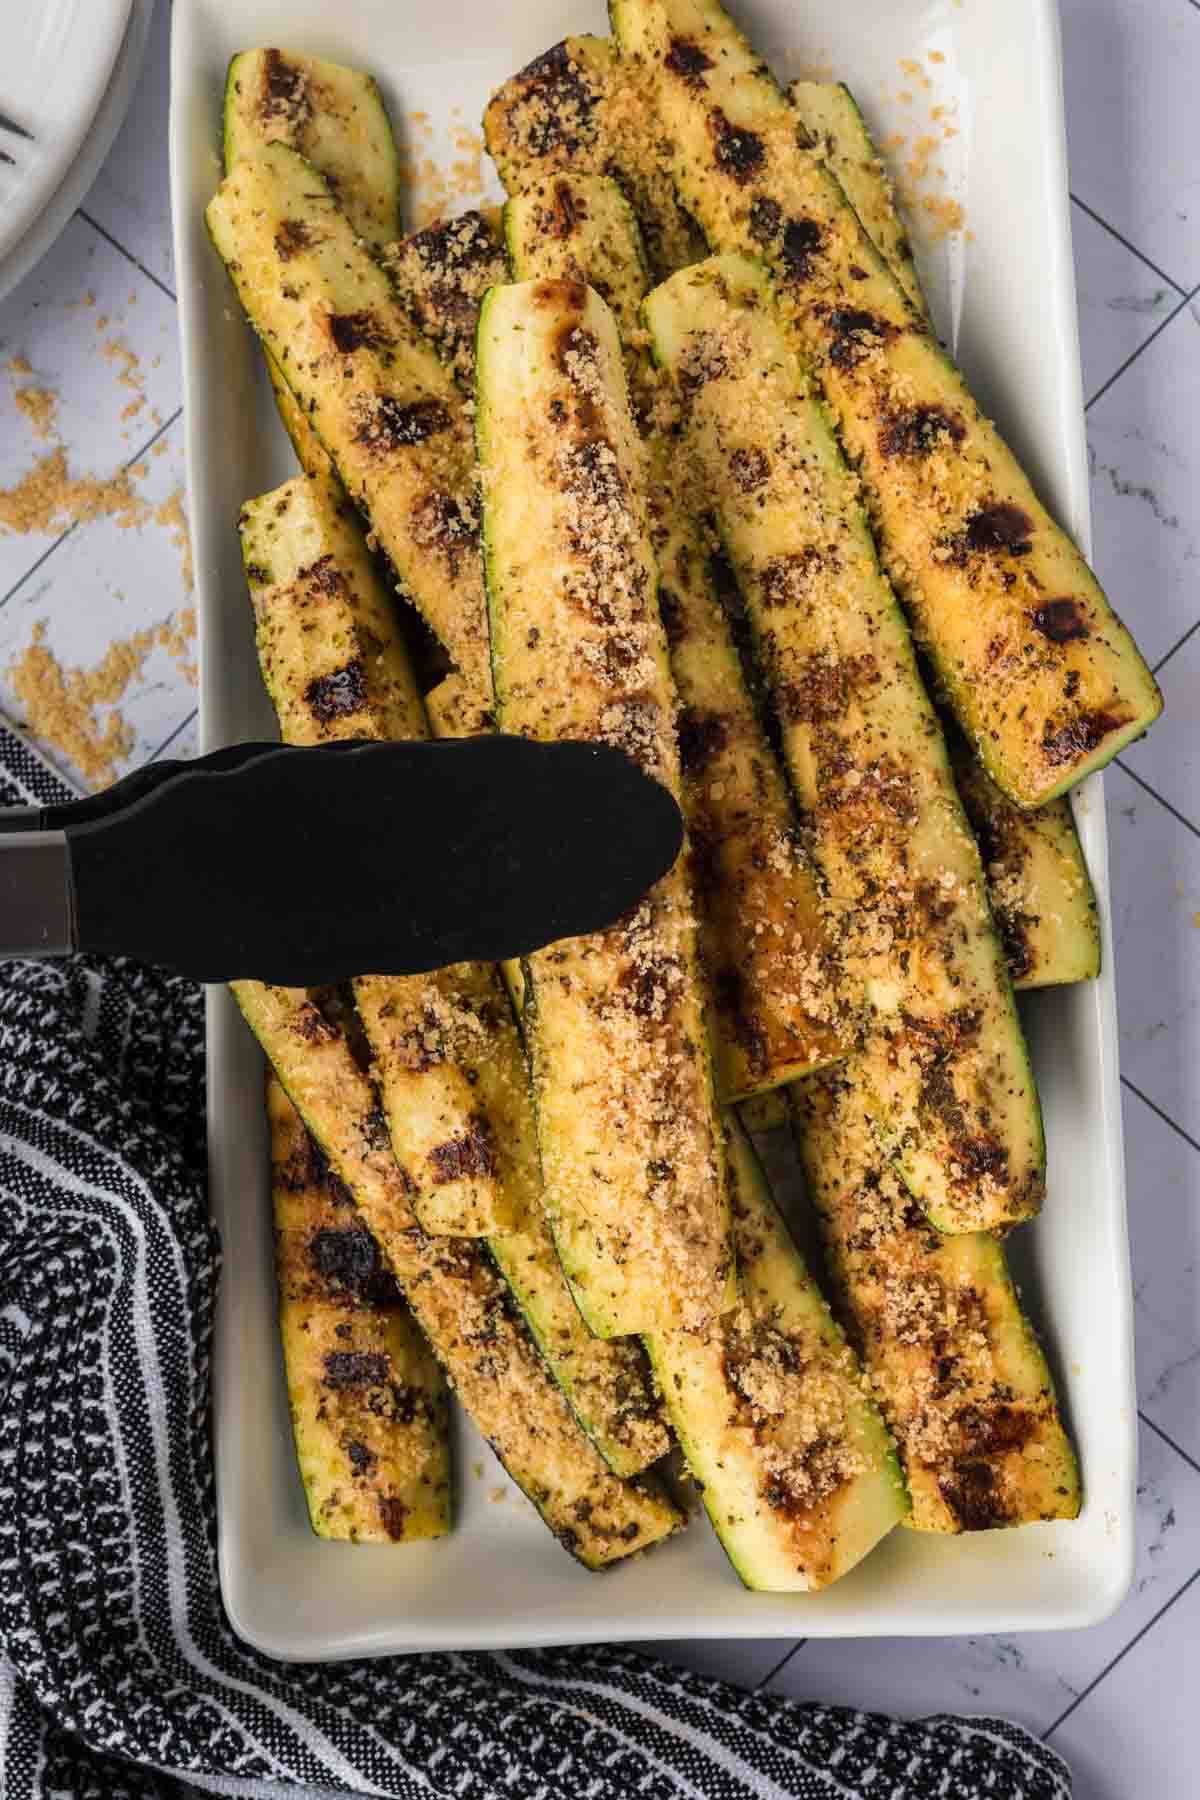 Parmesan Zucchini Spears stacked on a platter with a pair of tongs holding a zucchini spears ready to serve